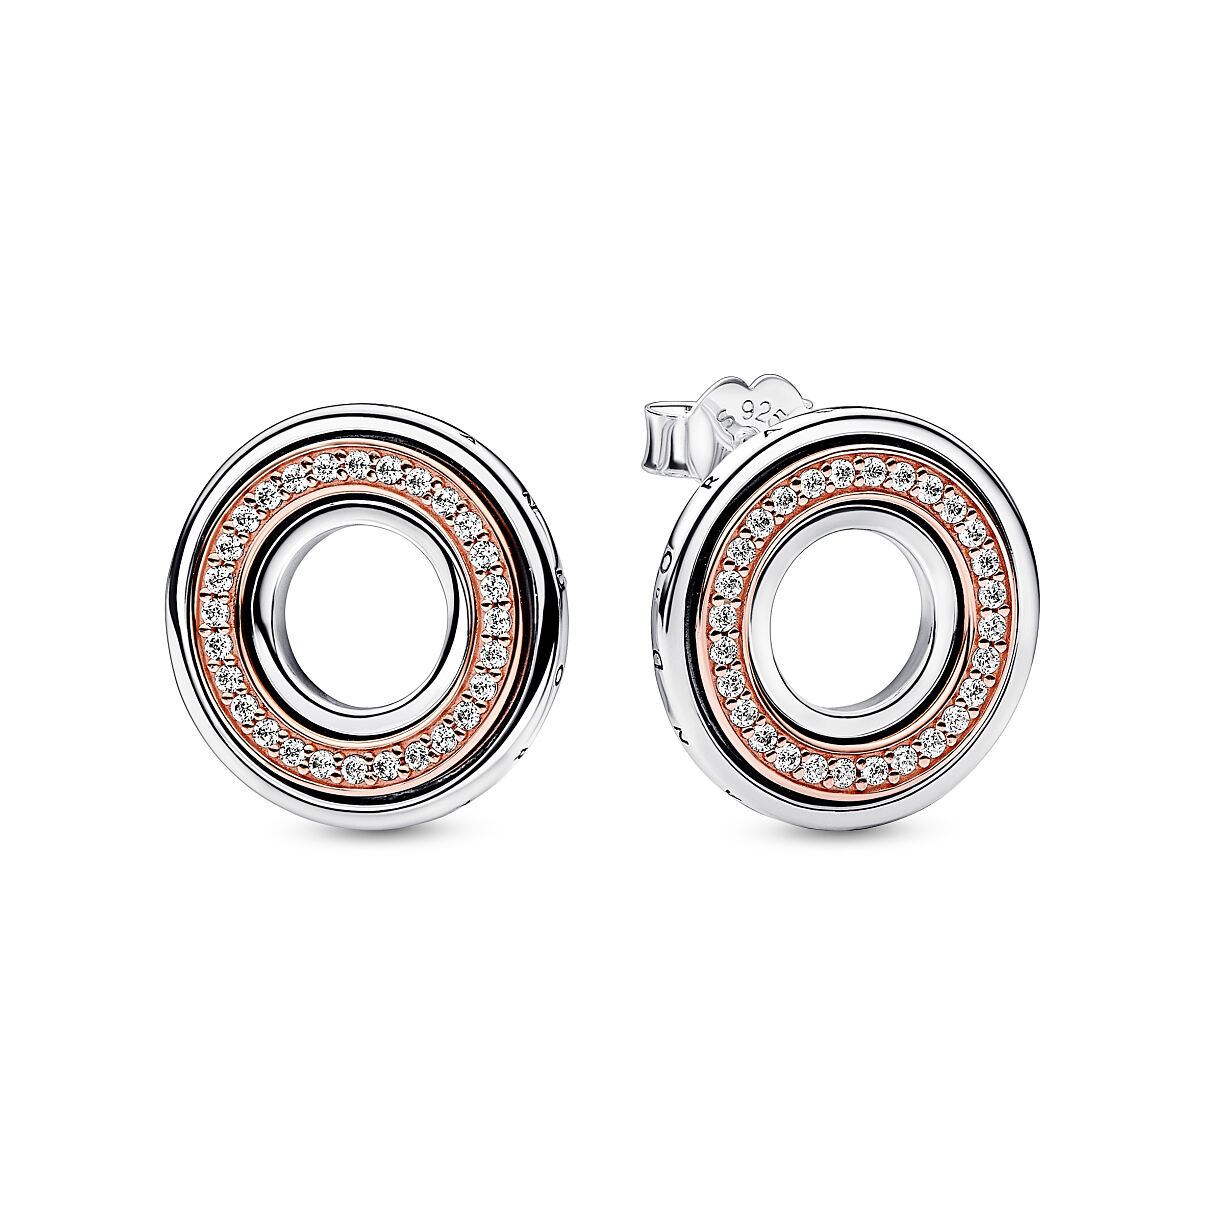 Pandora_Earrings_Sterling Silver_14k Rosé Gold-plated_Cubic Zirconia_282780C01_79,00 Euro